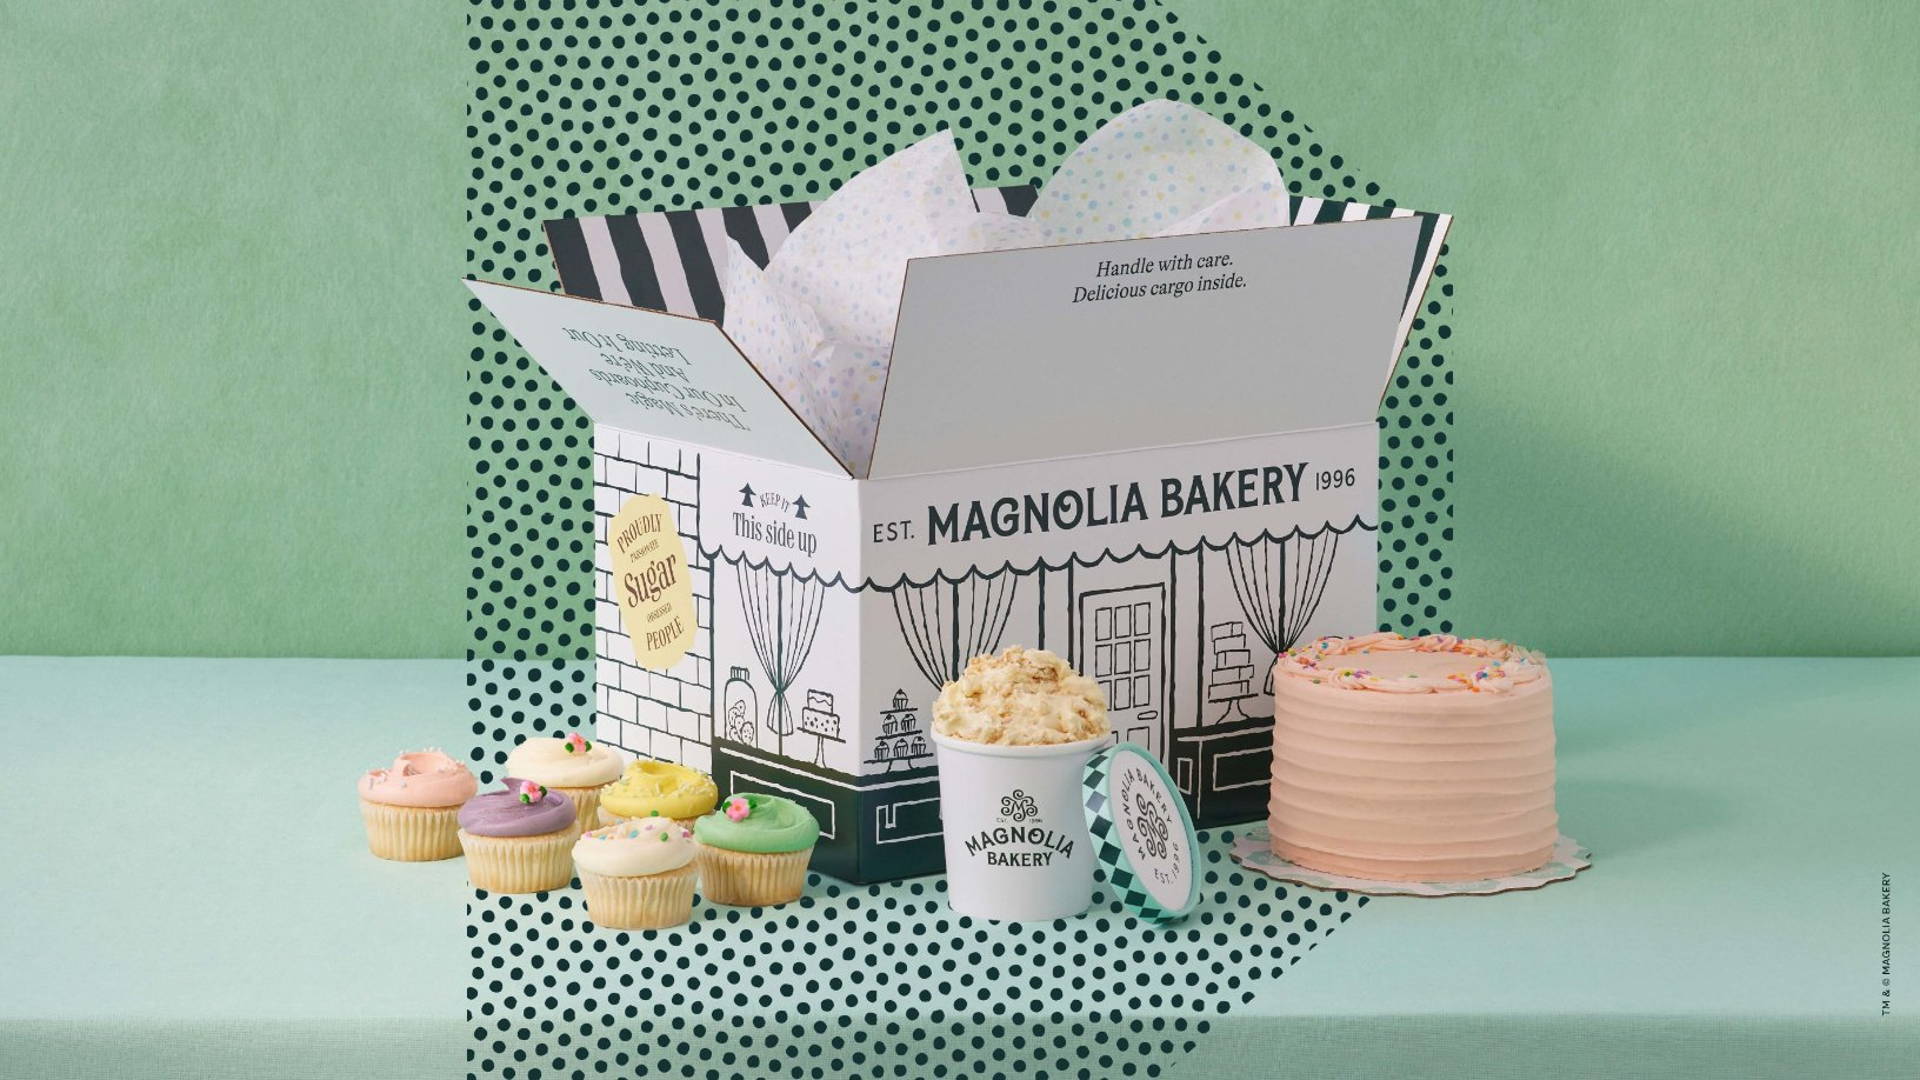 Featured image for JKR Gives Magnolia Bakery Some Much-Needed Whimsy With New Brand Identity